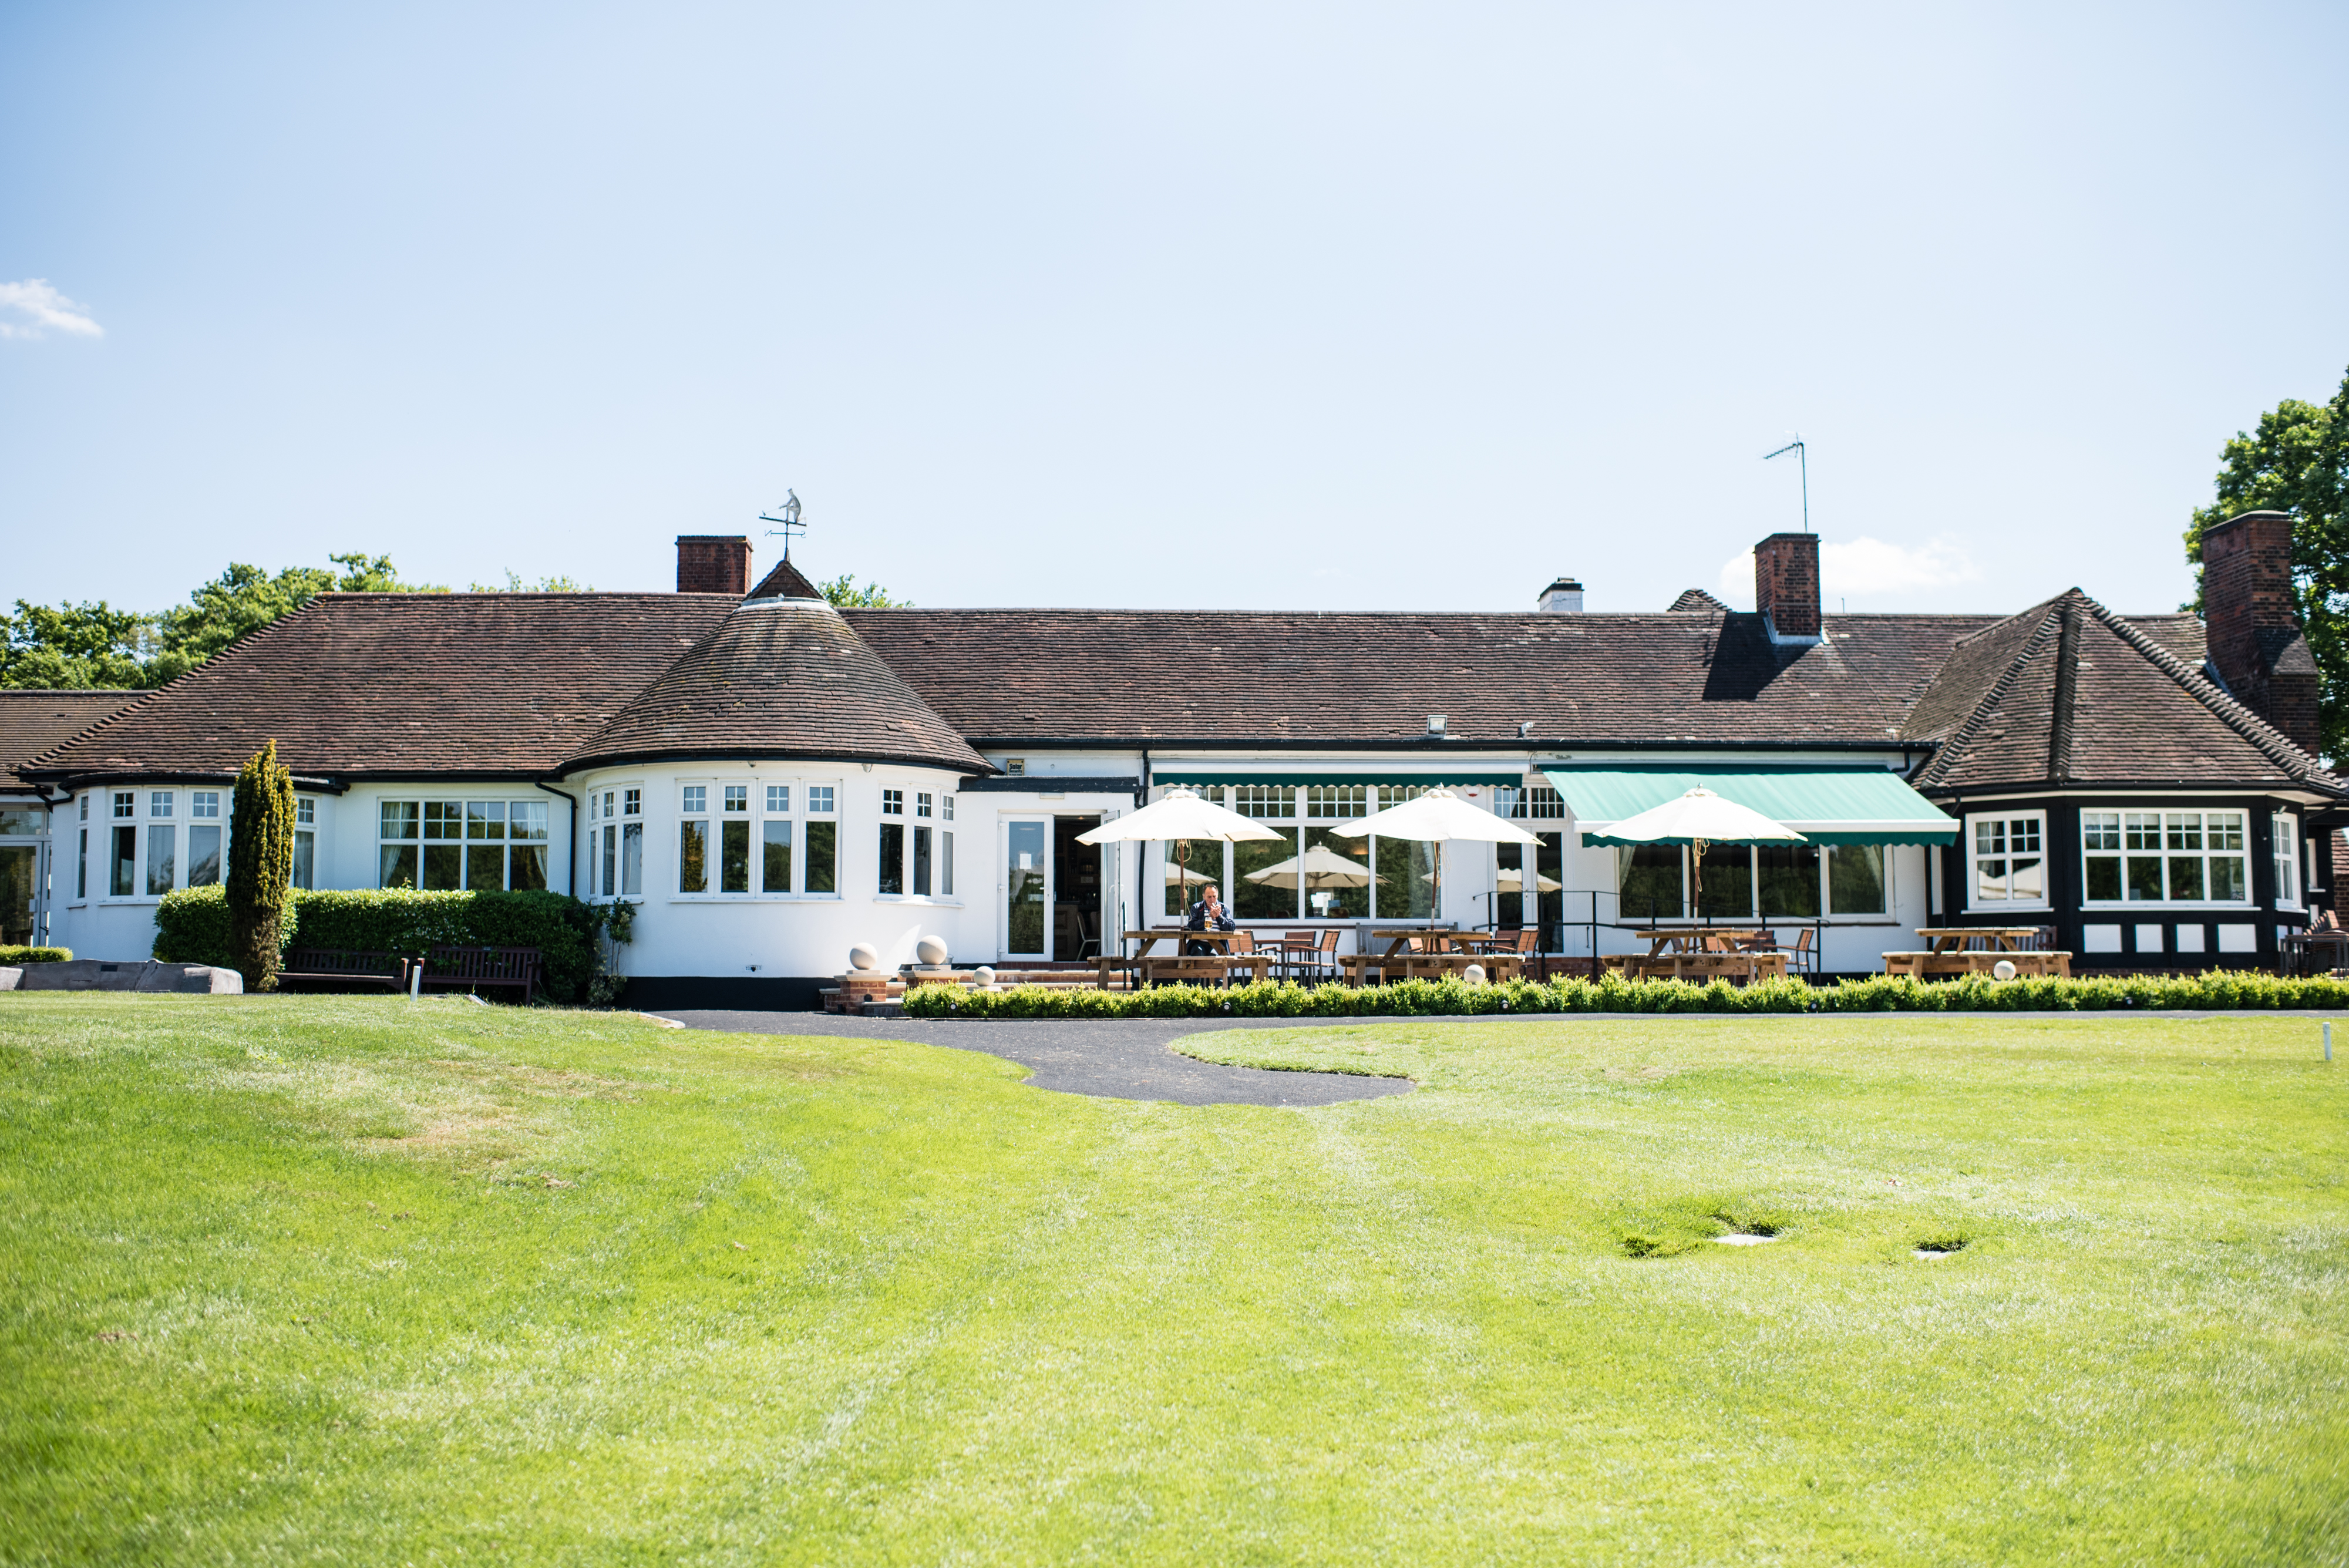 The clubhouse building of the Surbiton Golf Club